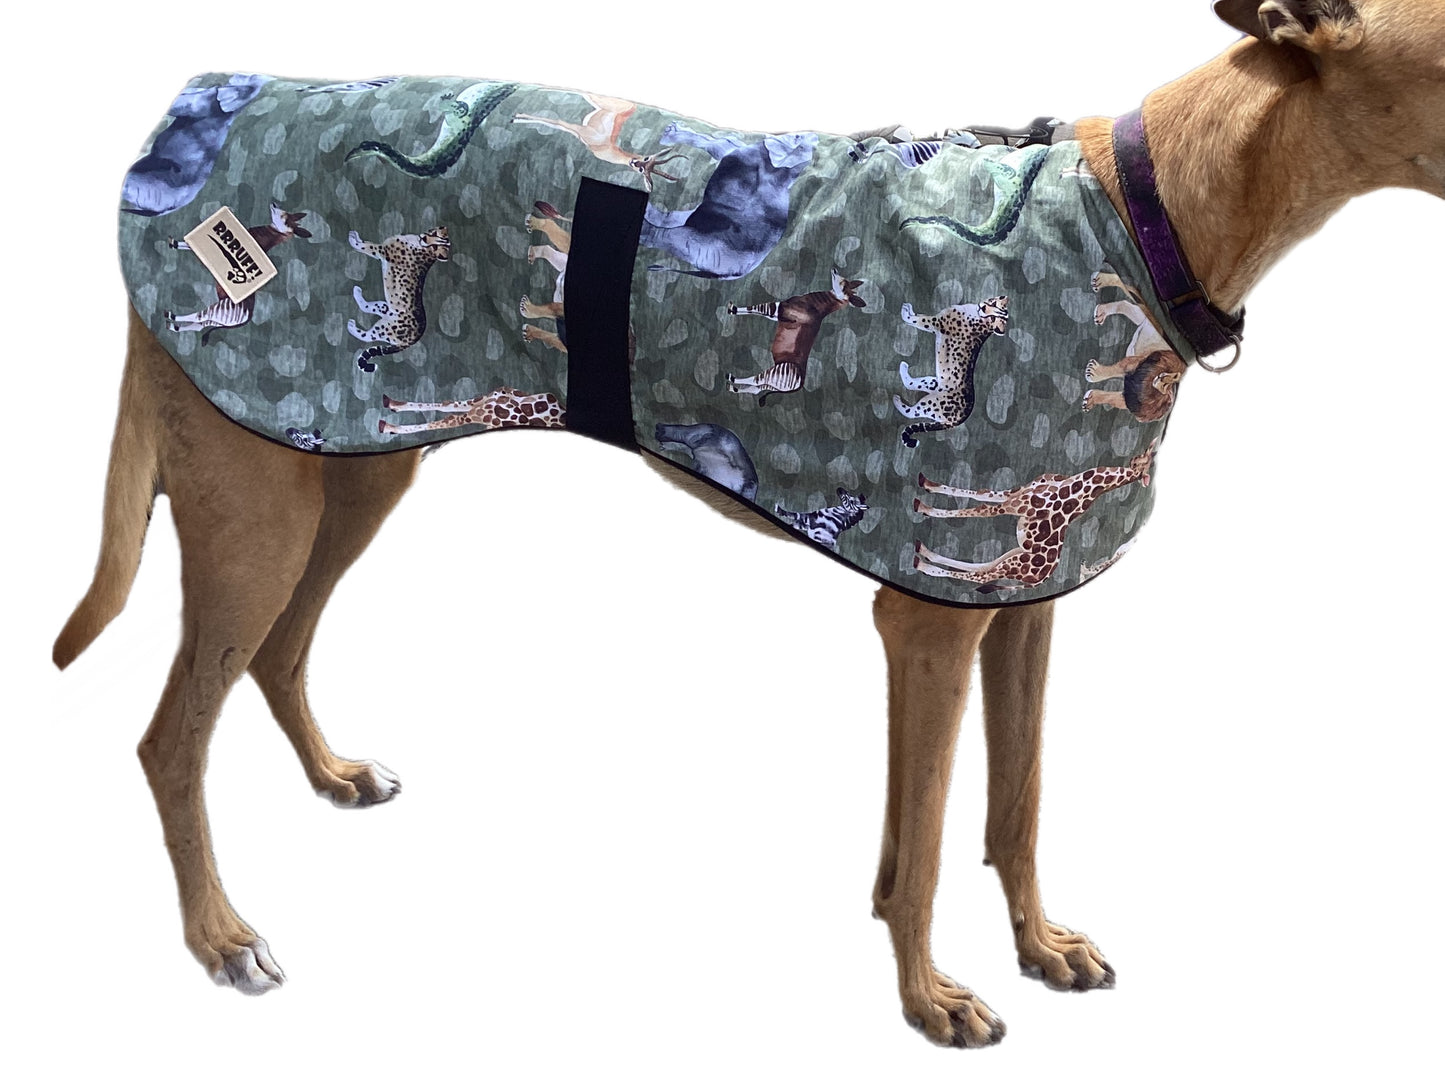 Summer nights classic style Greyhound coat in a super light cotton & fleece washable